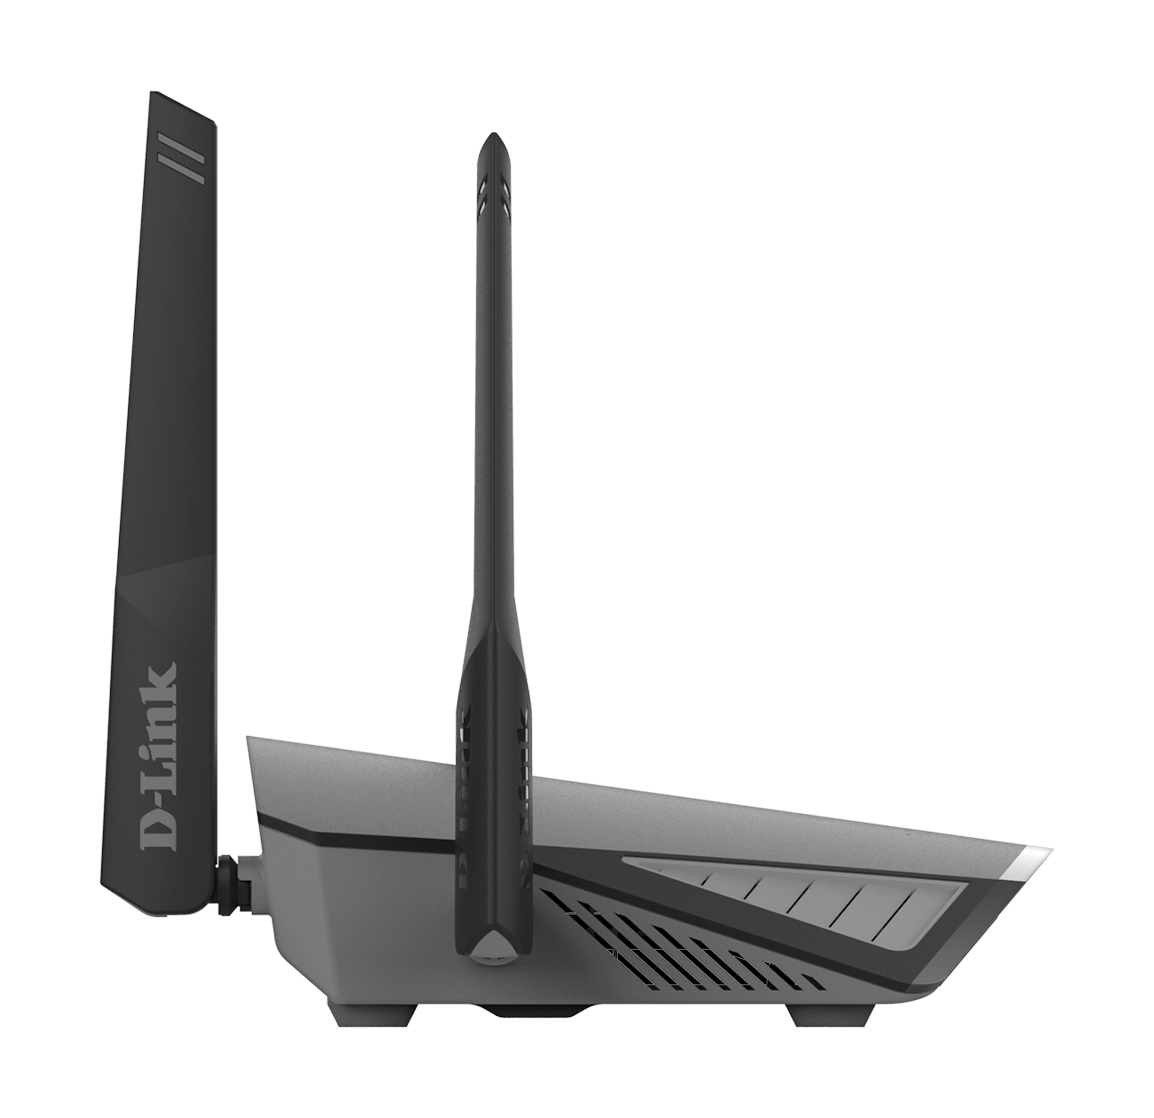 DIR-2660 EXO AC2600 Smart Mesh Wi-Fi Router right side